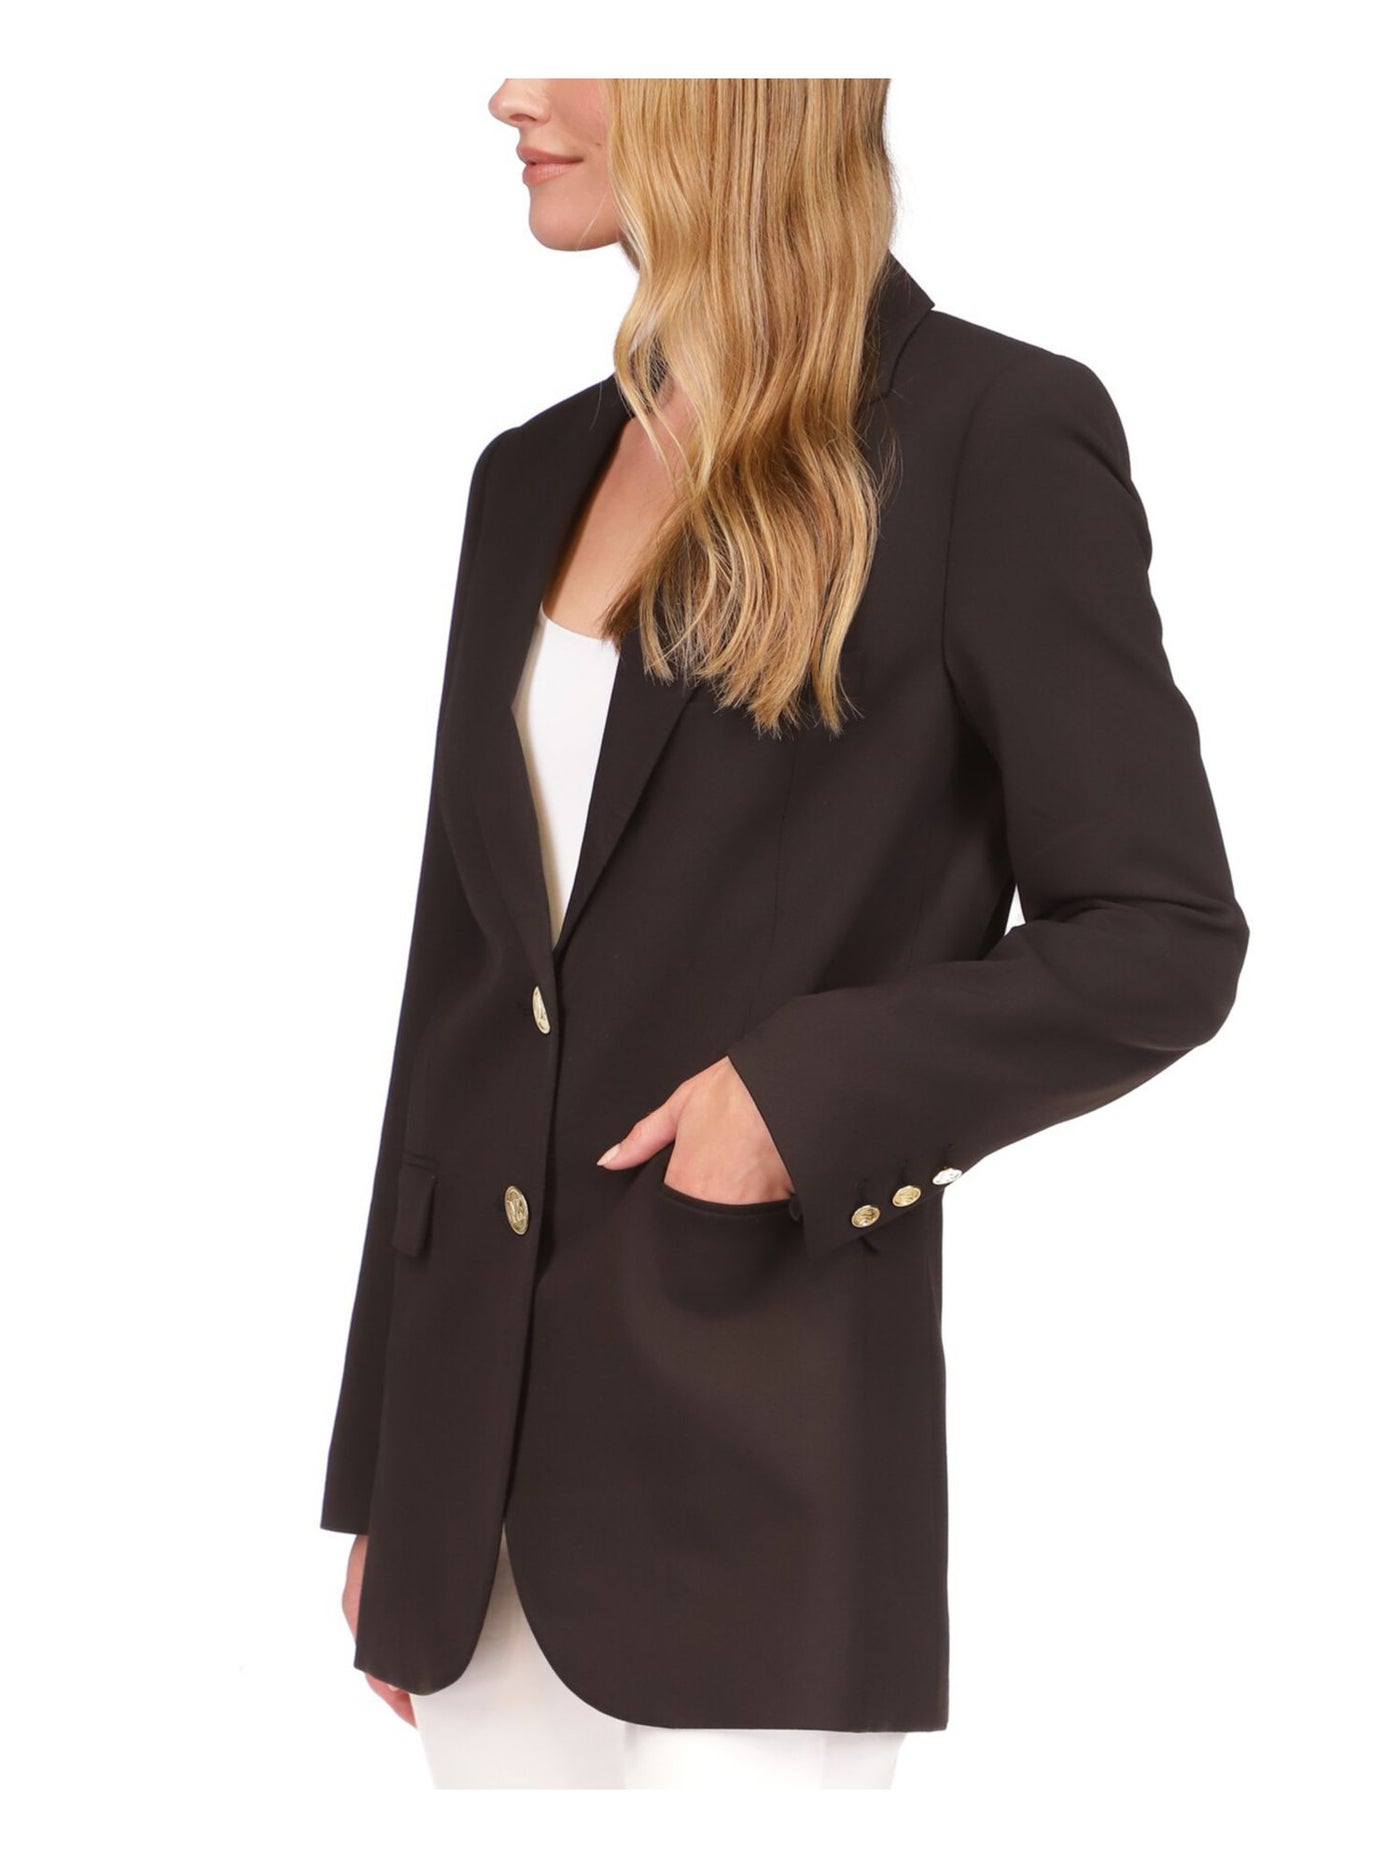 MICHAEL MICHAEL KORS Womens Black Pocketed Lined Notch Lapels Two-button Closure Wear To Work Blazer Jacket 10